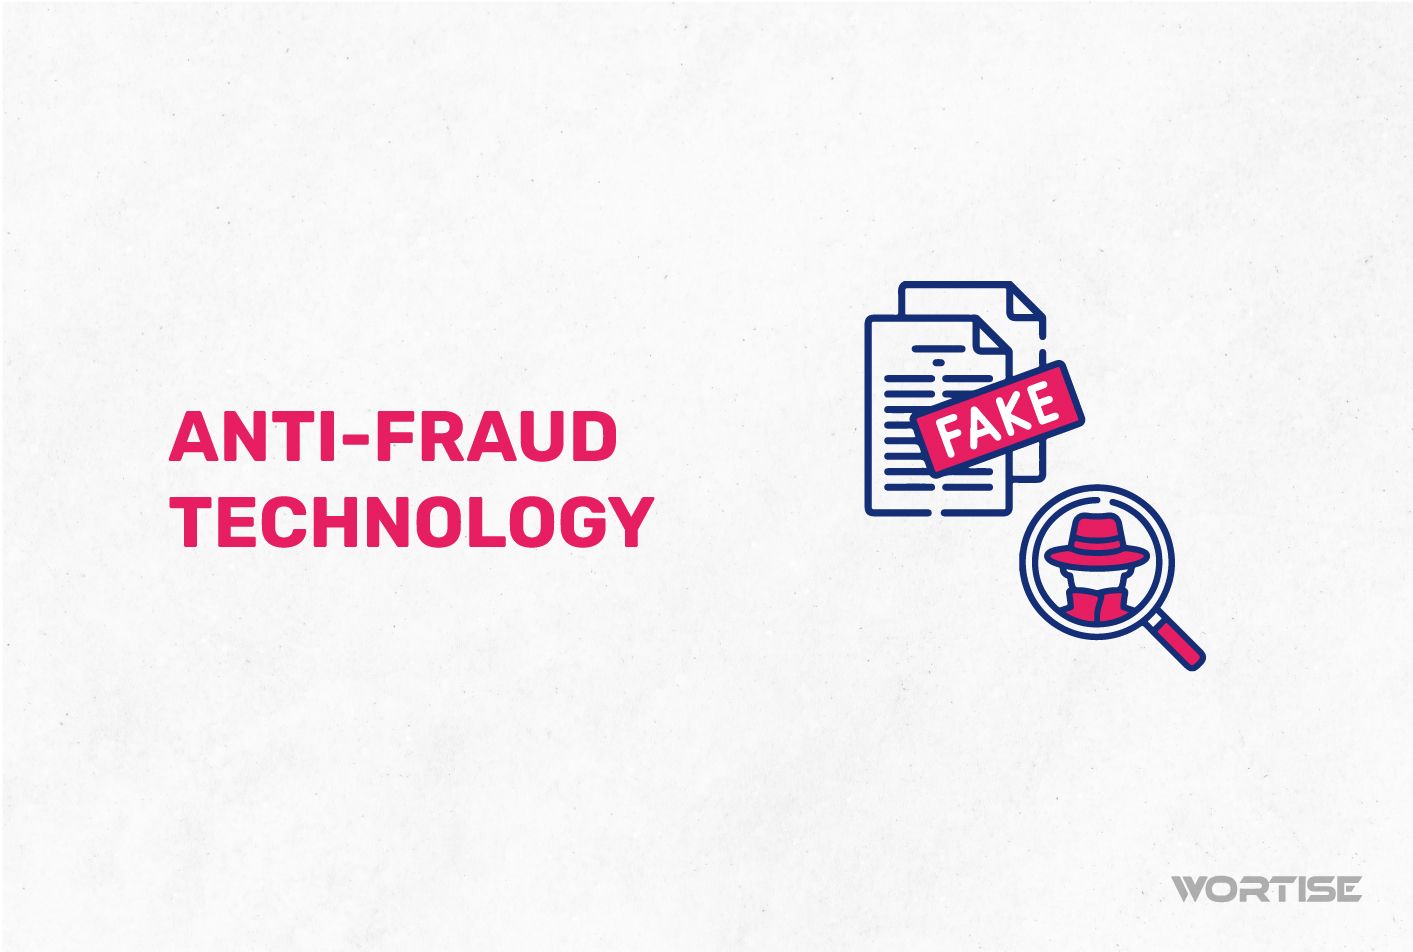 Wortise leads the AdTech market - with its new anti-fraud technology, it detects and eliminates over 100 fraudulent applications.